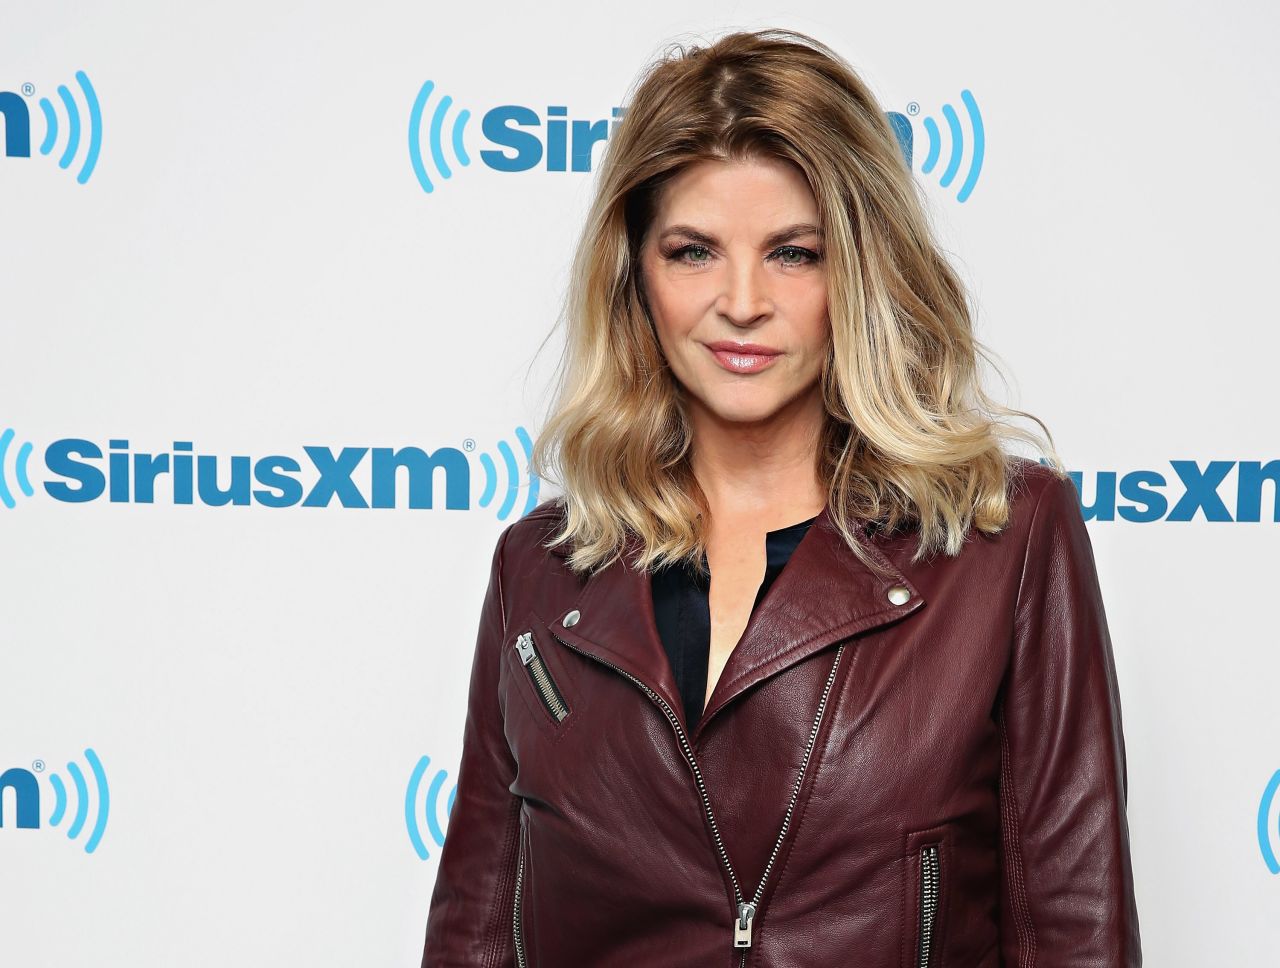 In April, <a href="https://twitter.com/kirstiealley/status/718576790076329984" target="_blank" target="_blank">actress Kirstie Alley tweeted</a> "HELLO BOYS! this is my formal endorsement of @realDonaldTrump & I'm a woman!"